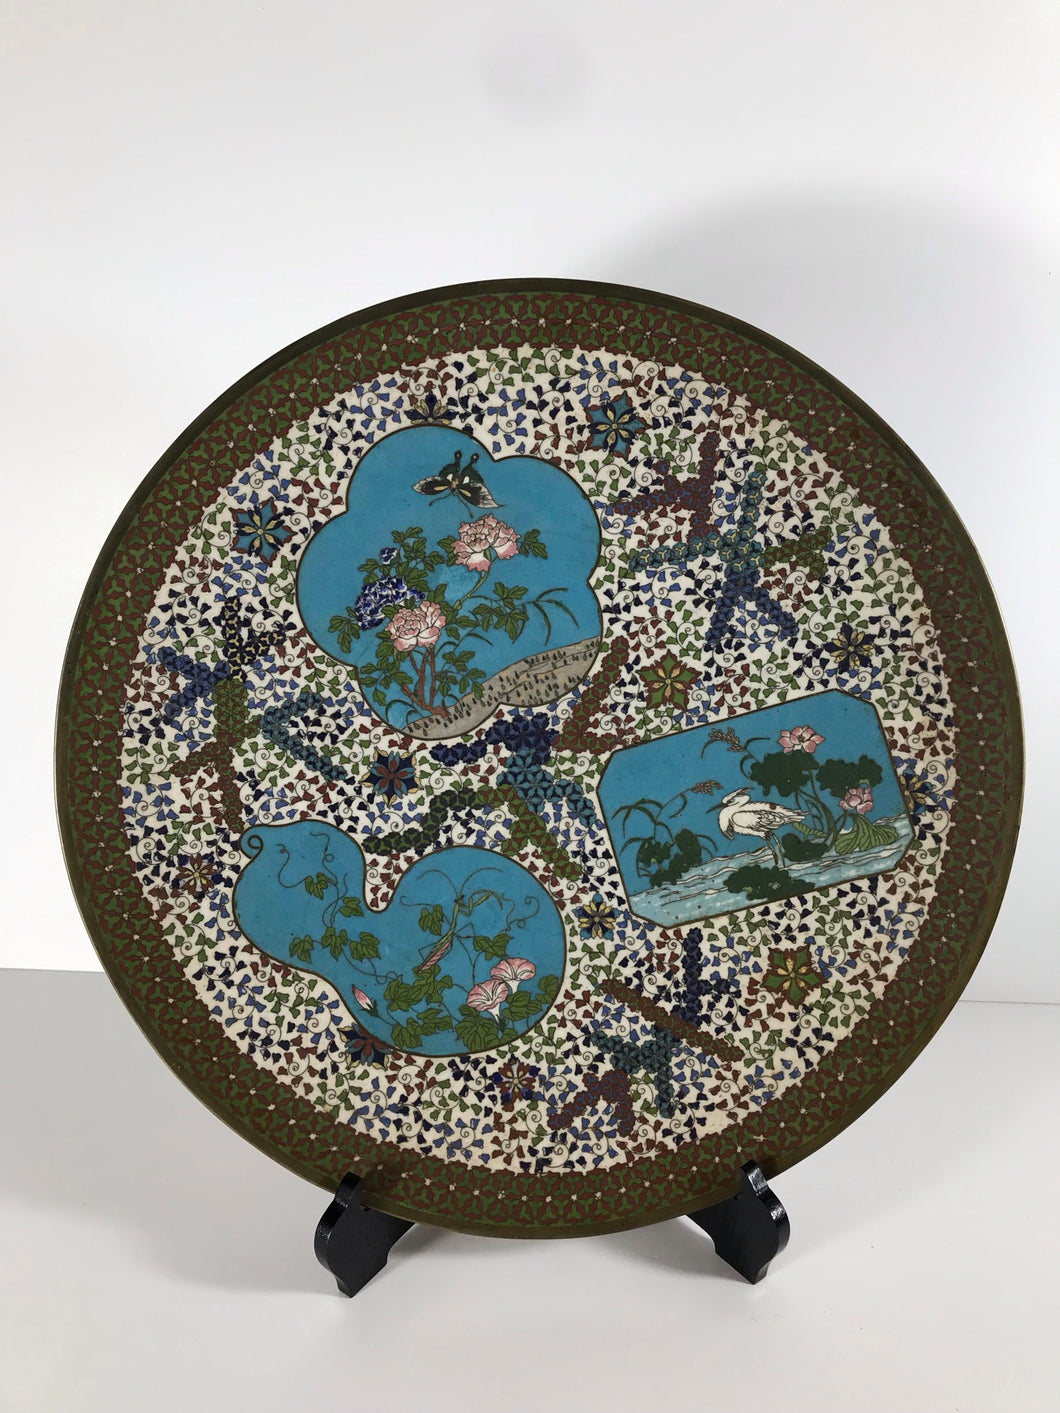 Early Japanese Cloisonne Charger with Flora and Fauna